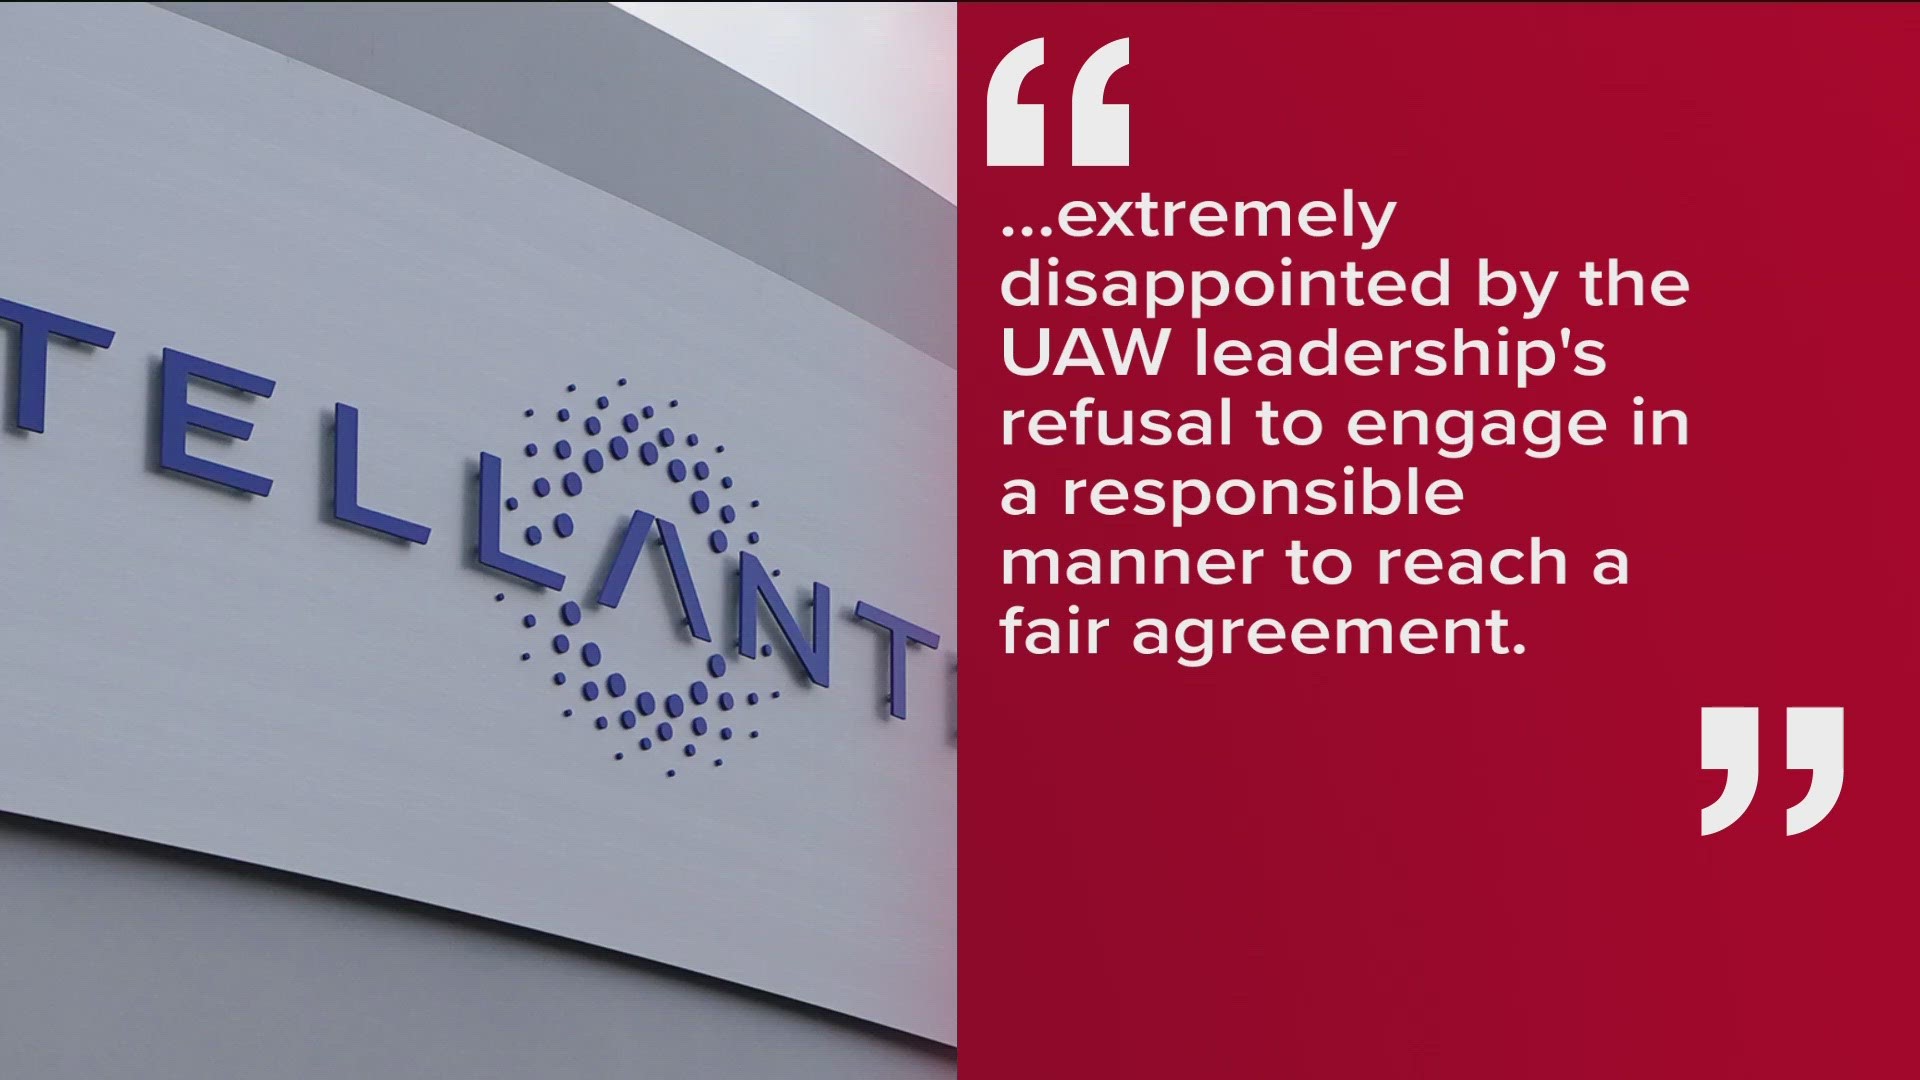 Stellantis, General Motors and Ford all released statements expressing disappointment that the UAW chose to strike.